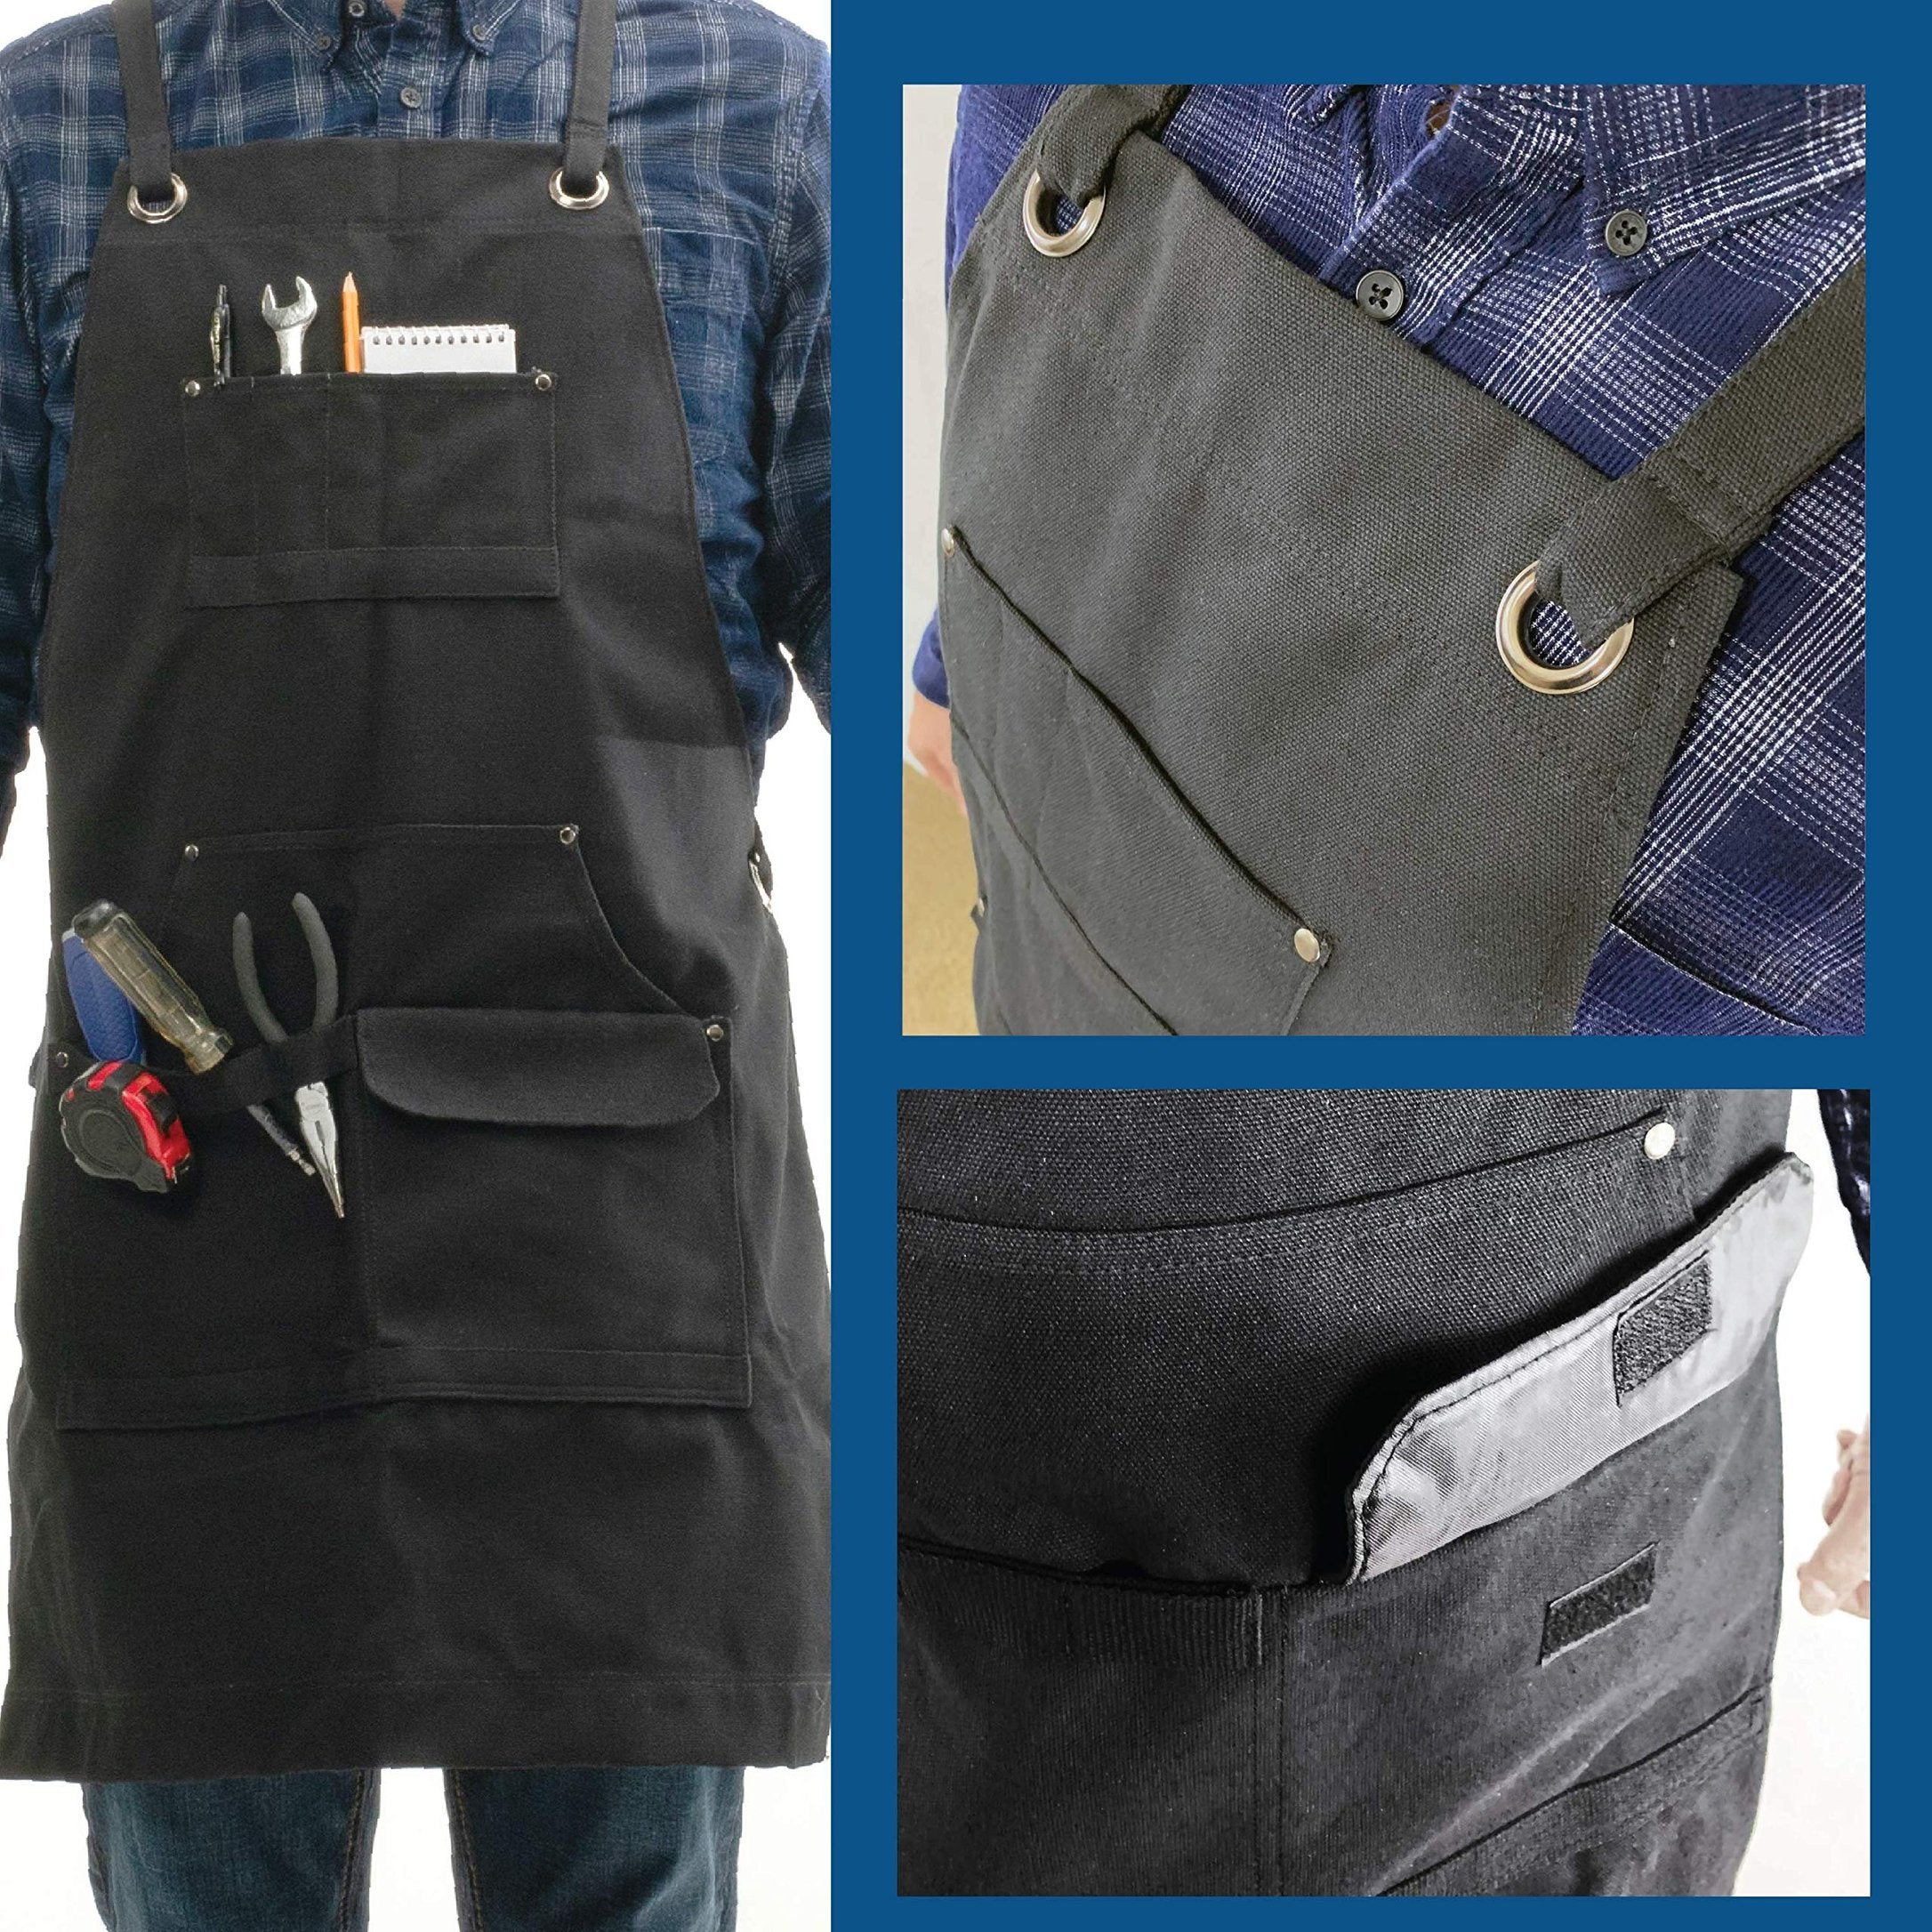 Rugged Tools Work Apron - Heavy Duty Canvas Shop Apron with Tool Pockets (Black)